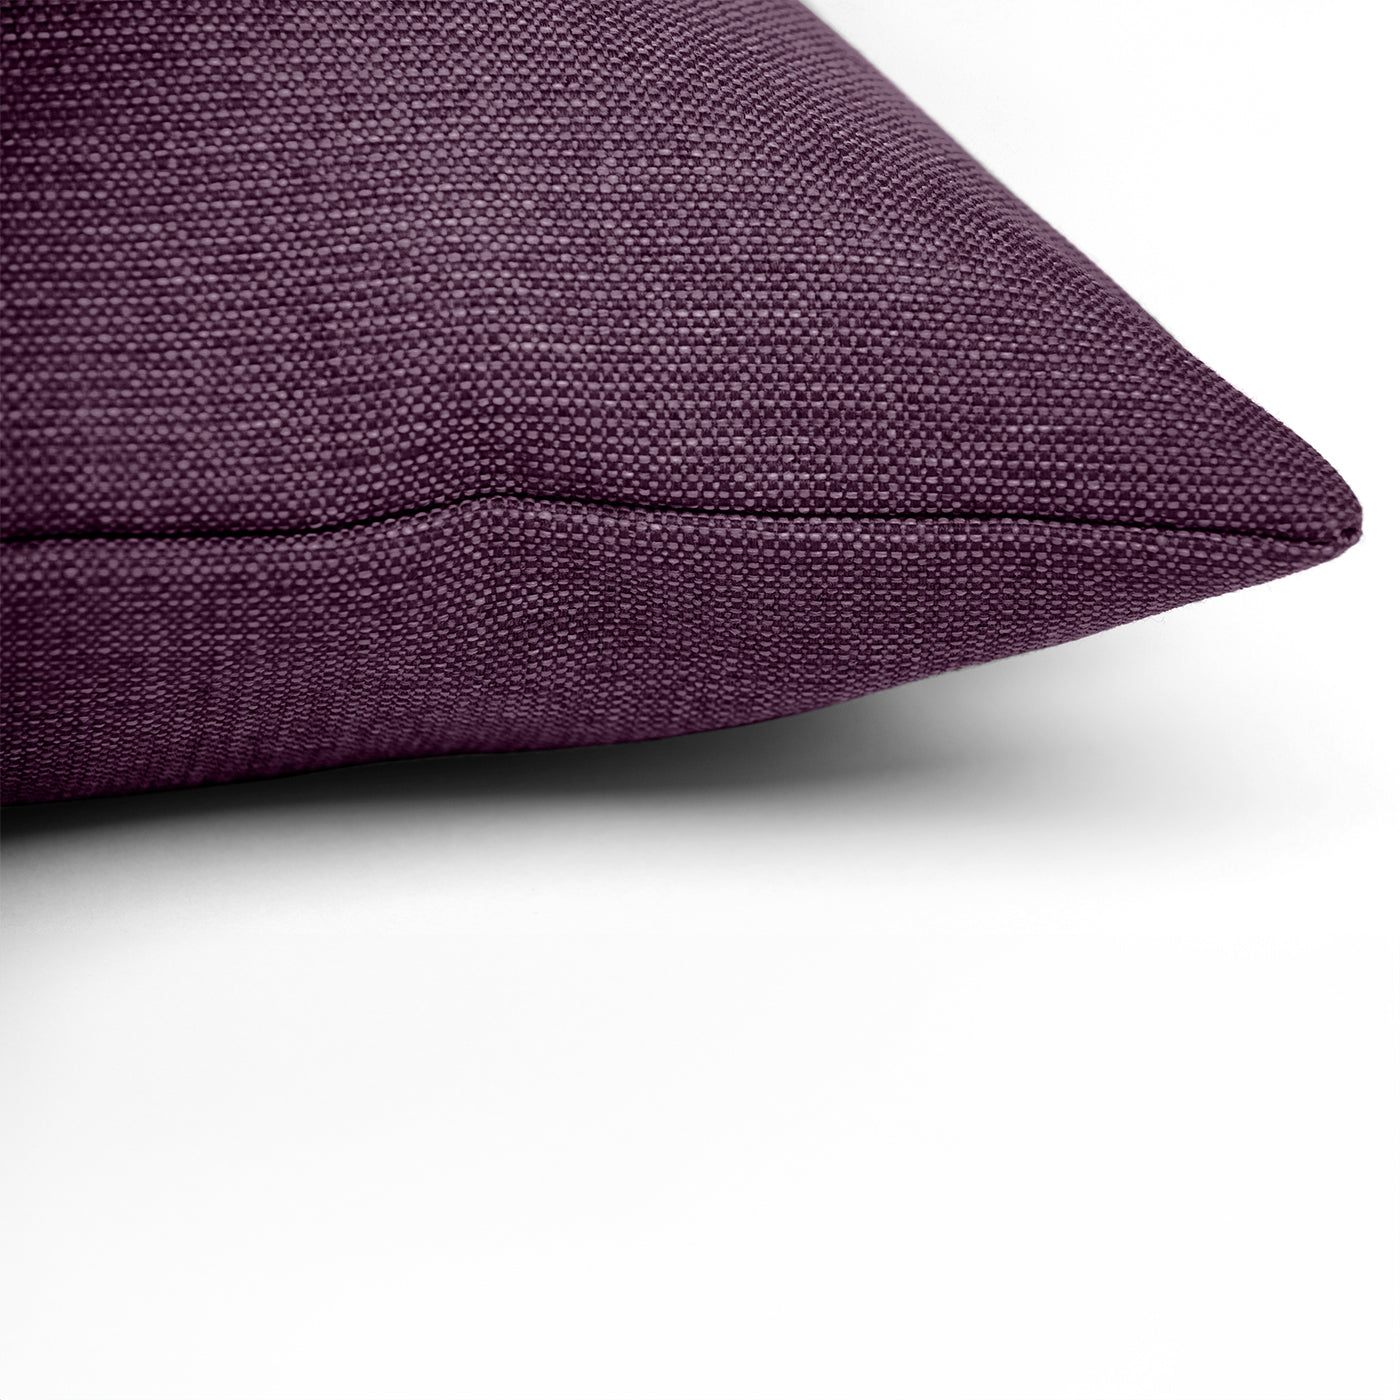 The Lounging Hound Twist Pillow Bed In Heather, Luxury Dog Beds & Pillows, Available Now at Lords & Labradors